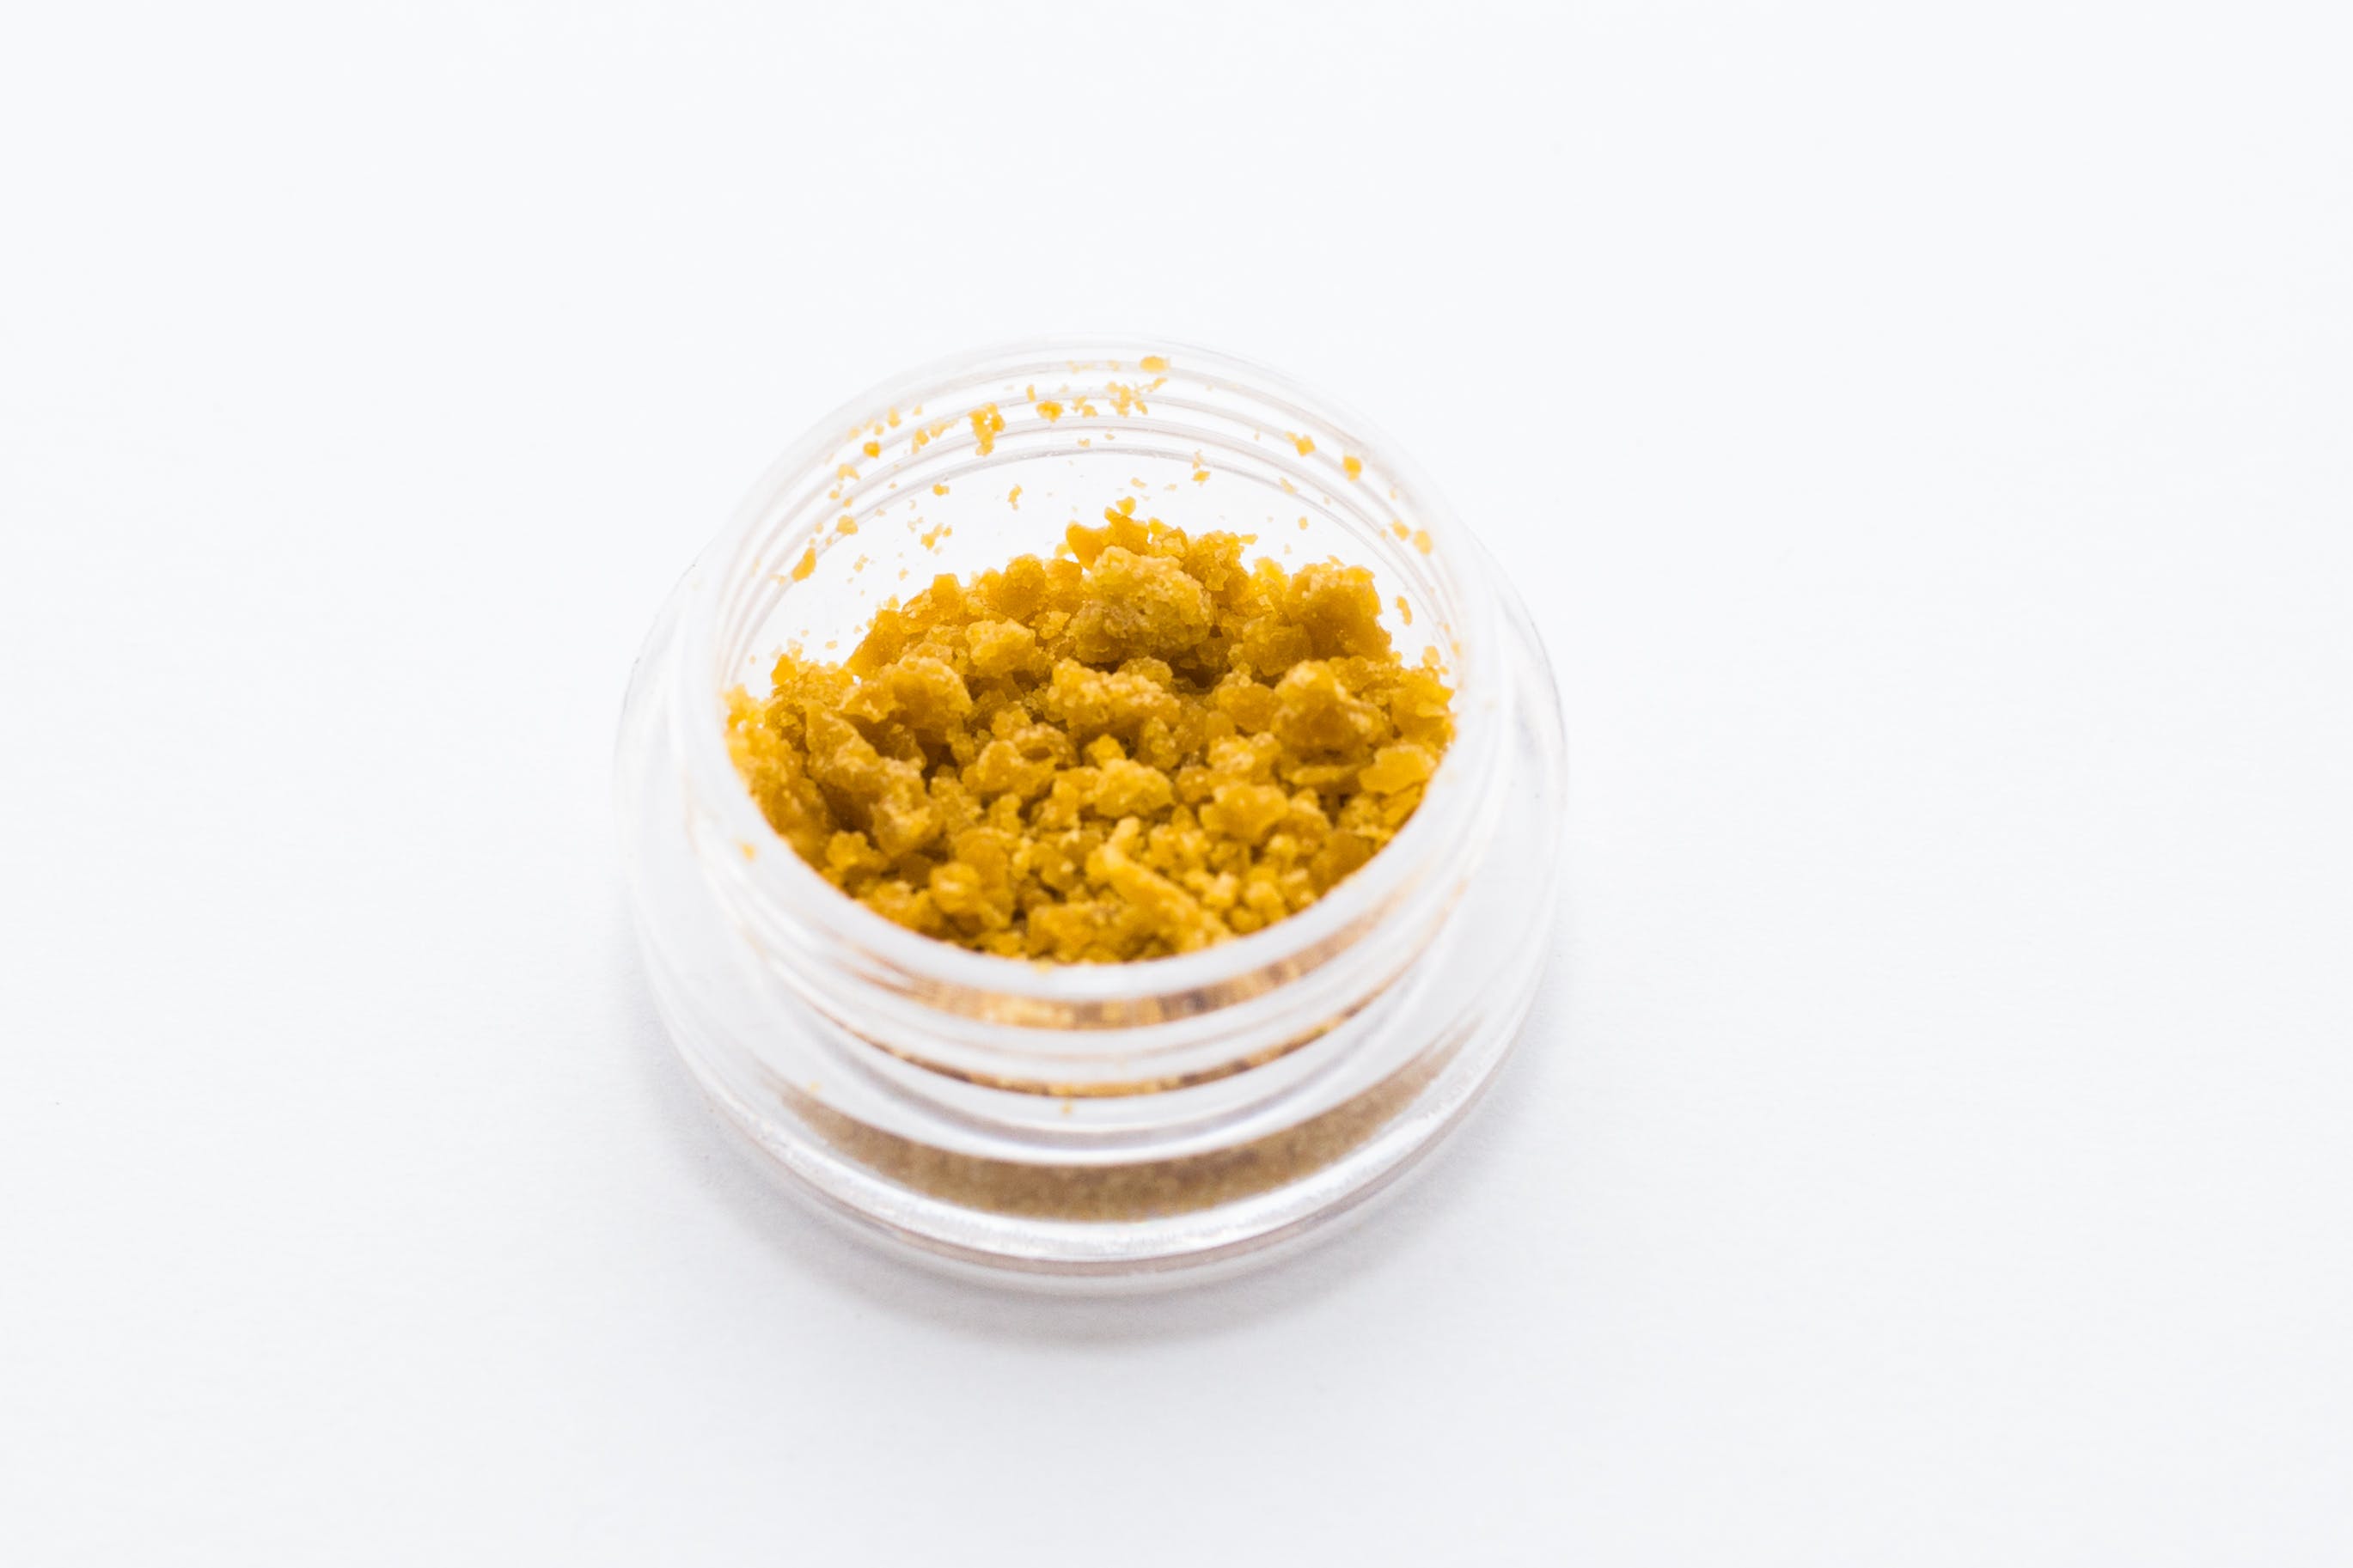 concentrate-wedding-cake-crumble